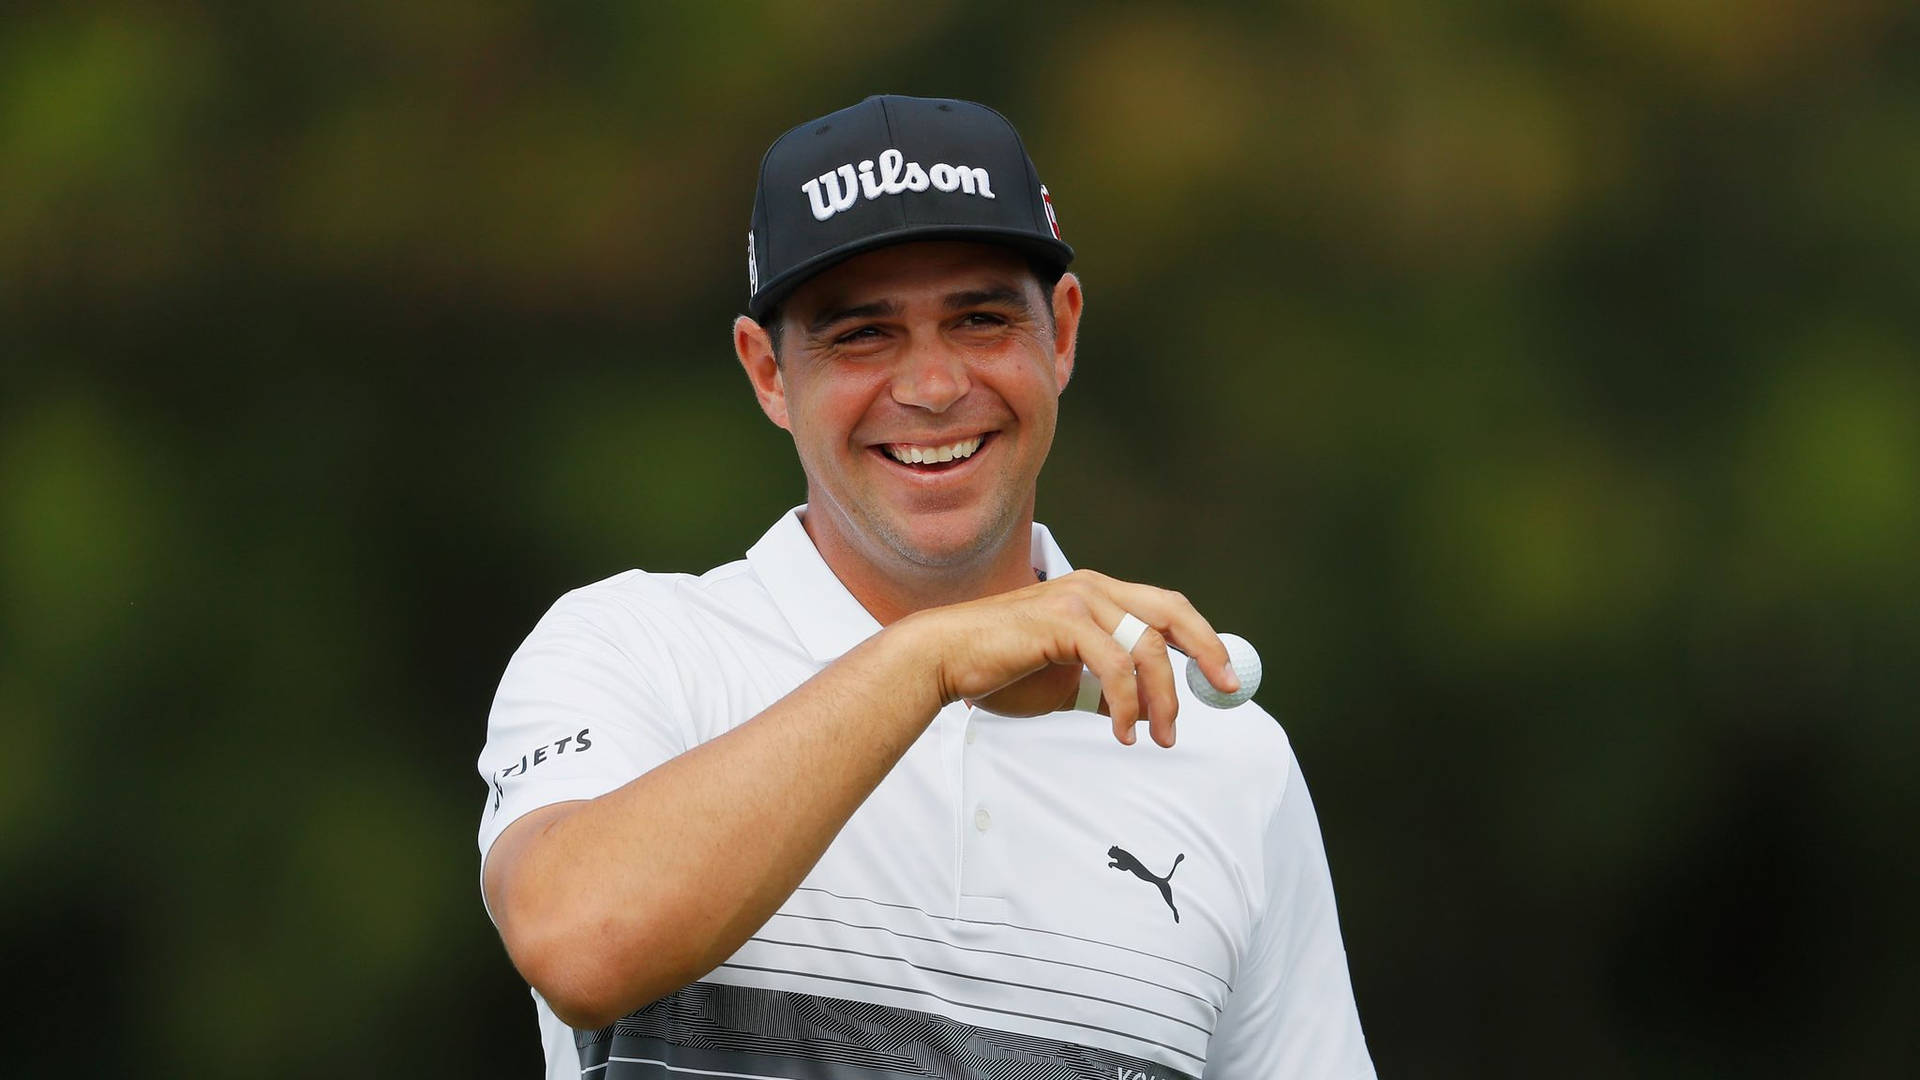 Download Gary Woodland Laughing And Smiling Wallpaper | Wallpapers.com